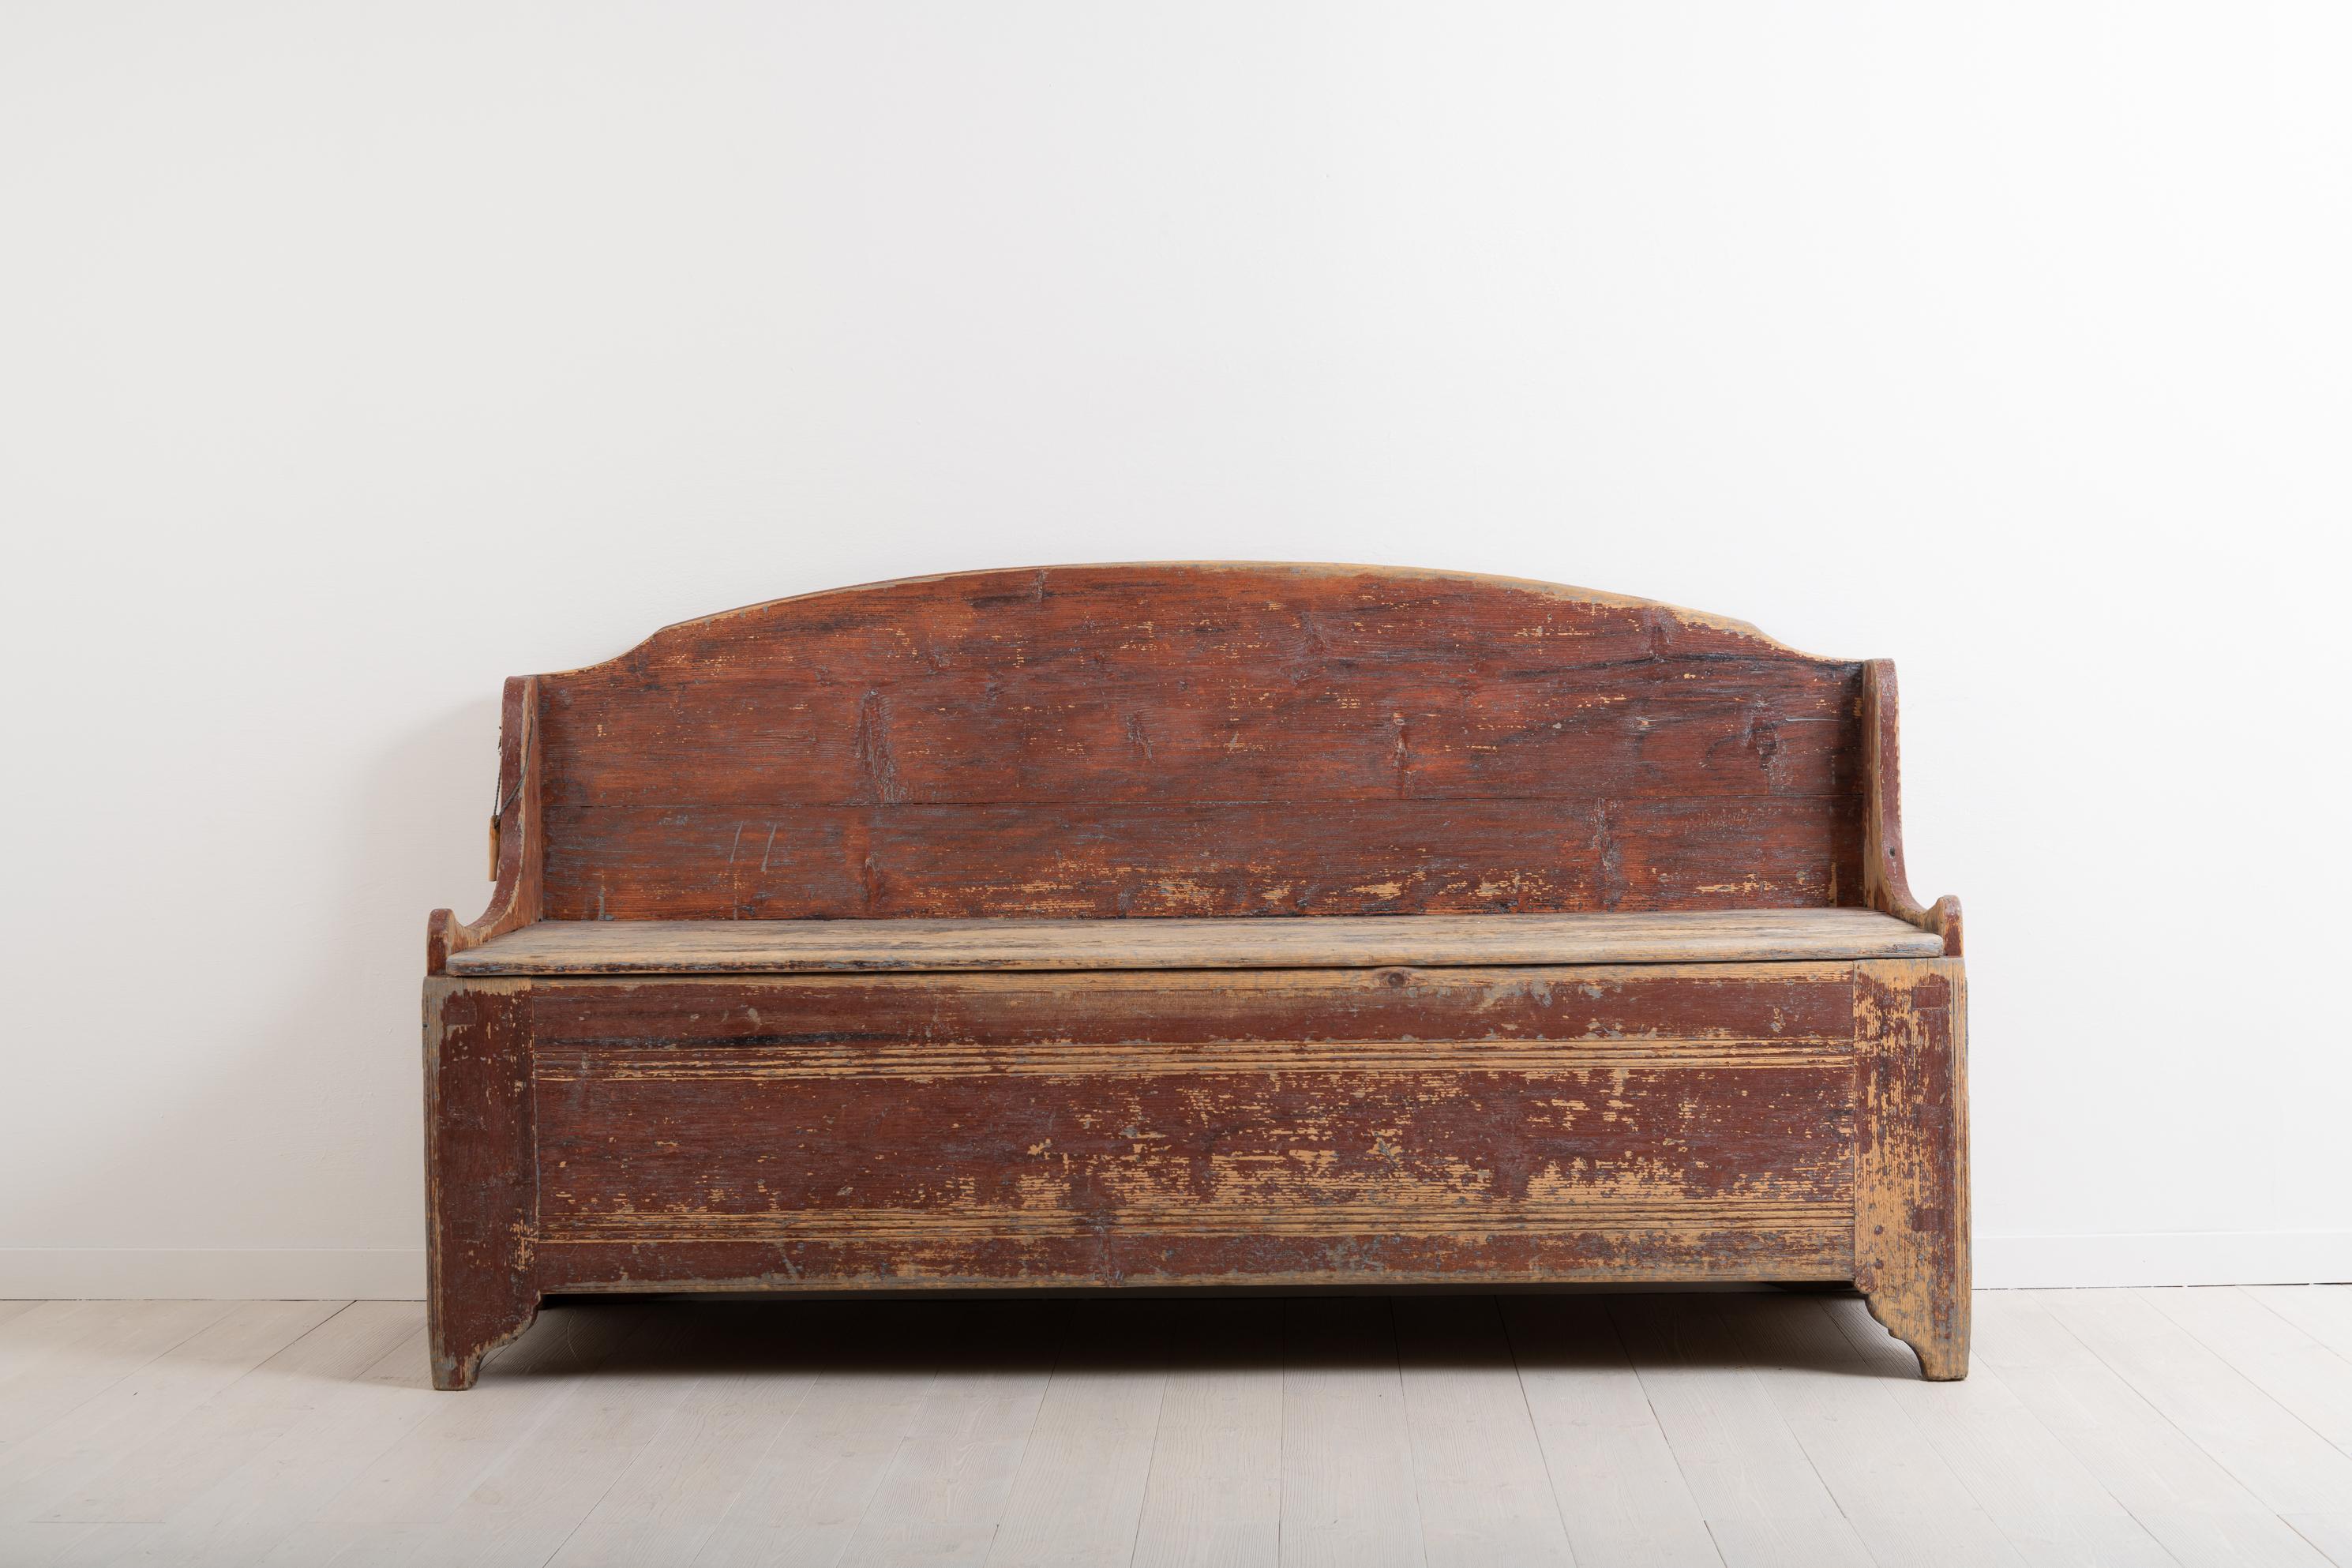 Hand-Crafted Late 18th Century Rustic Swedish Bench